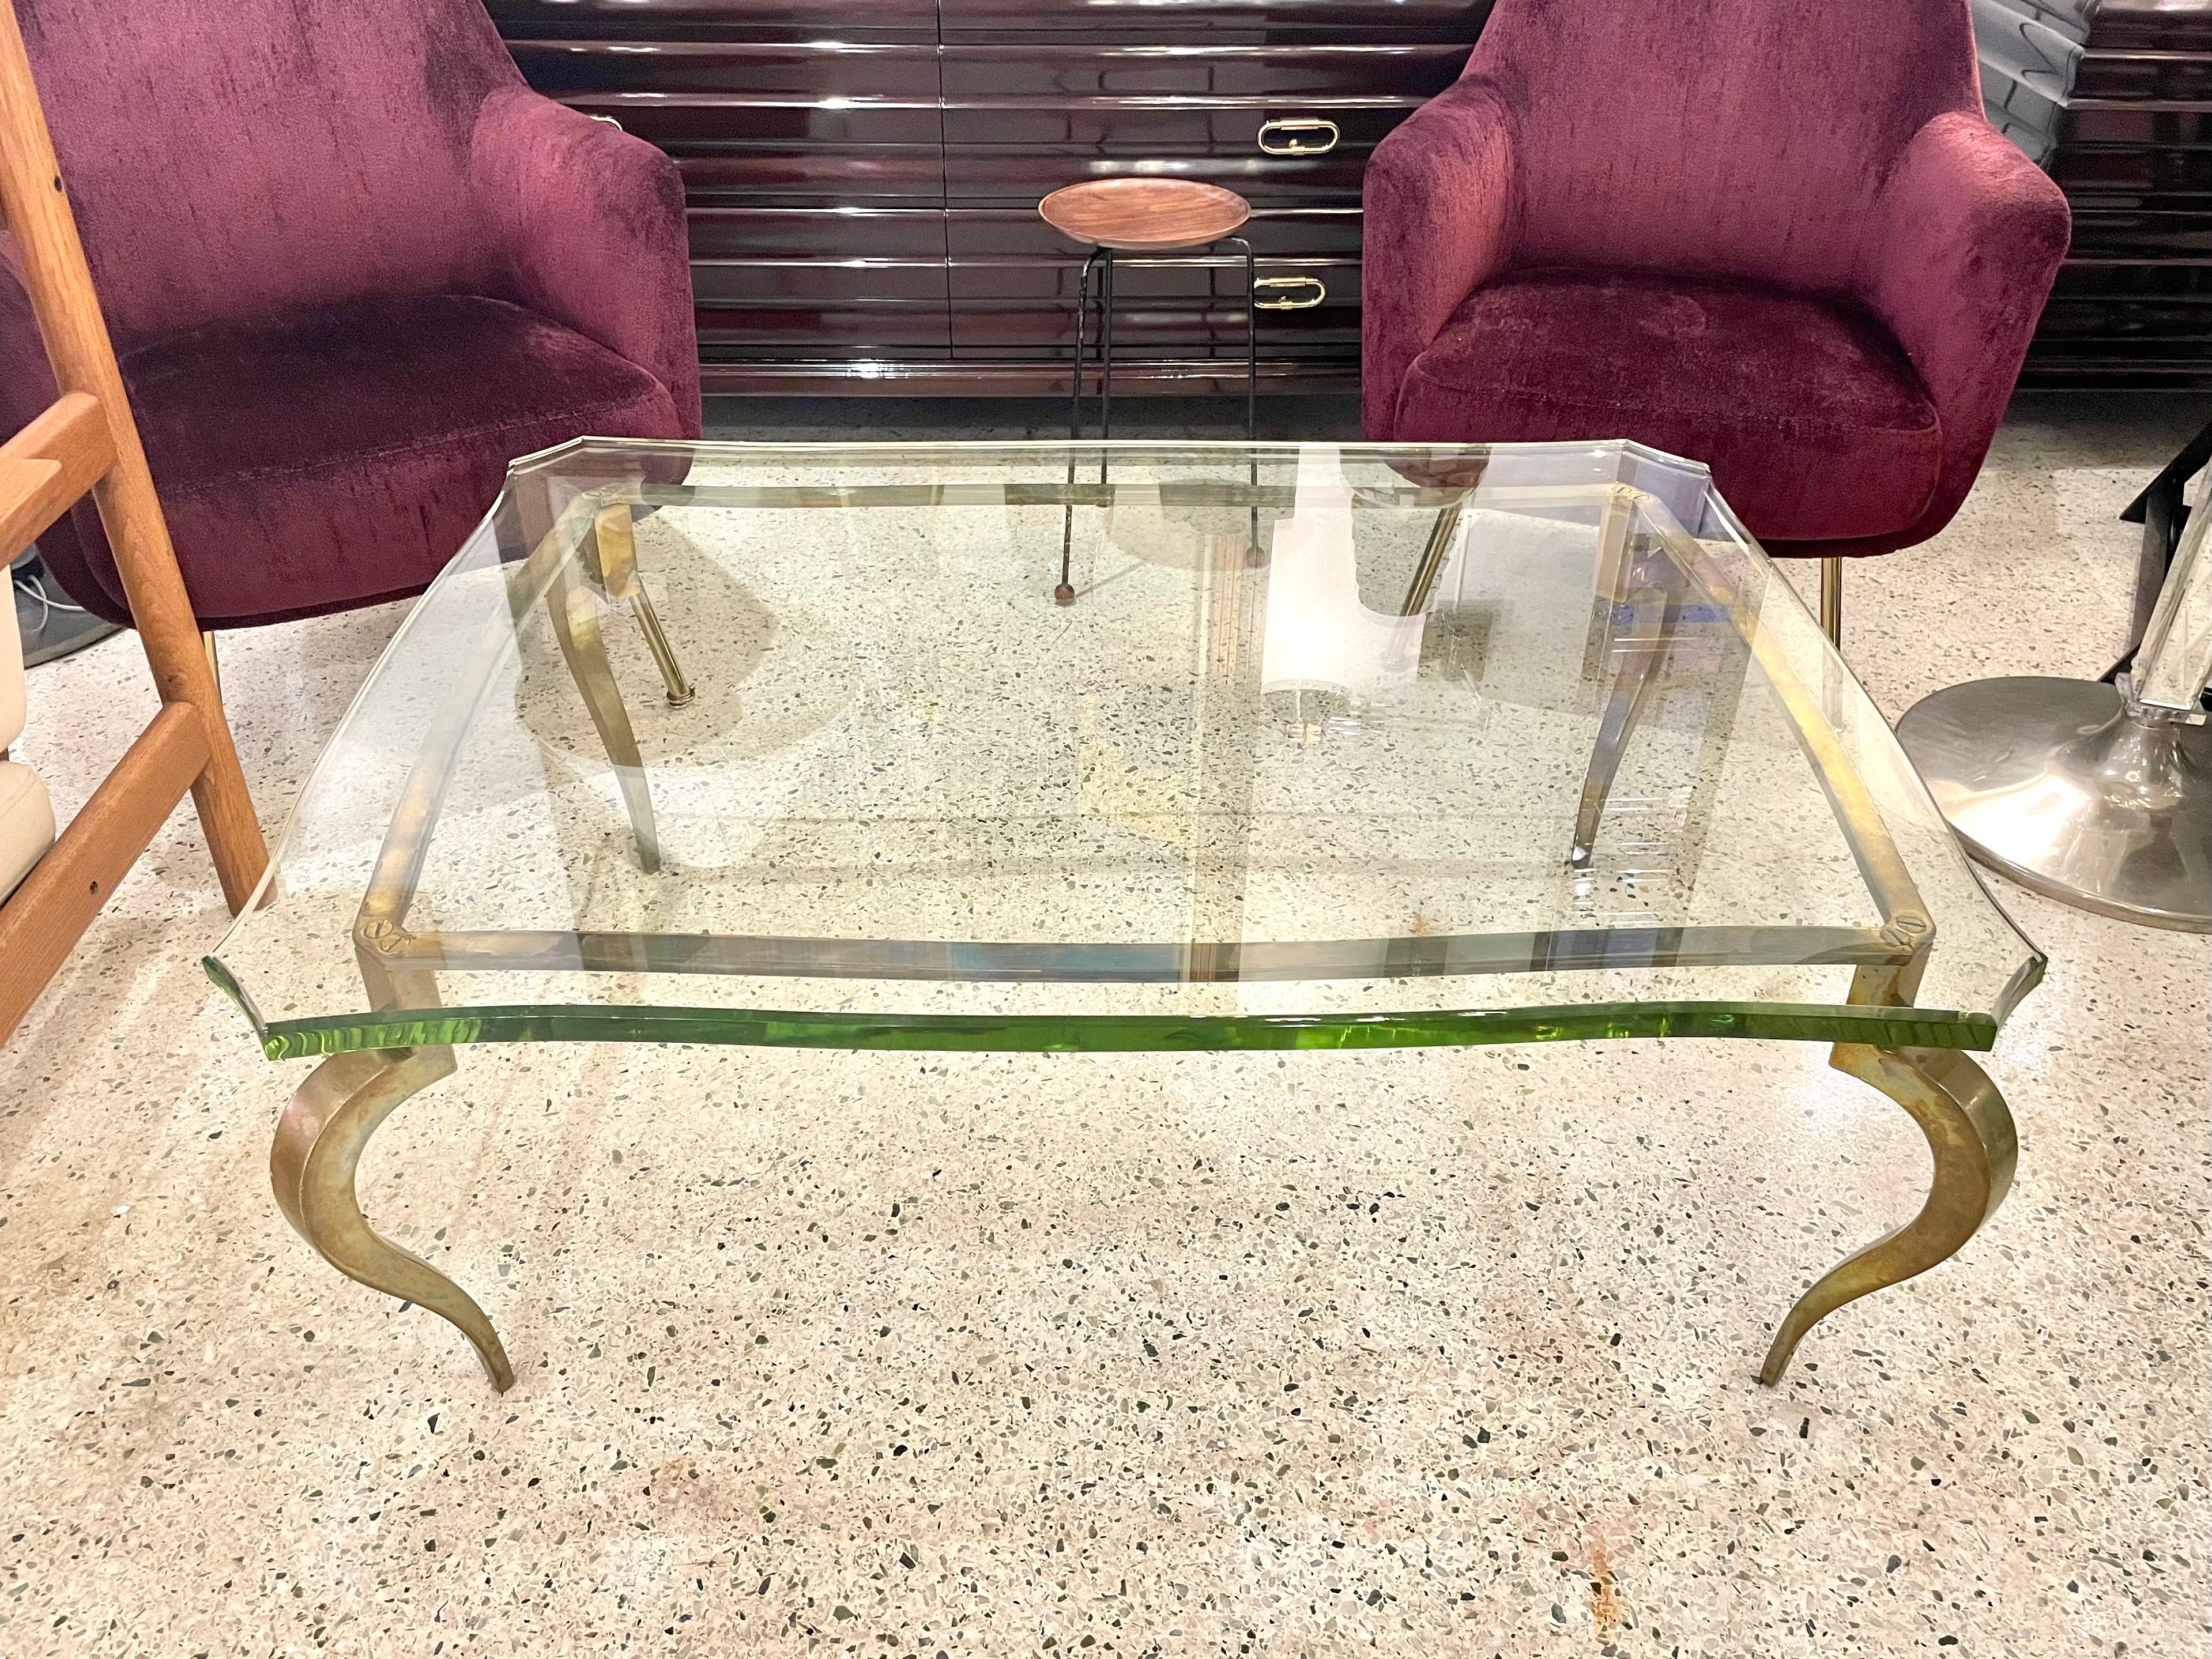 This extremely well designed bronze coffee table with cabriolet legs and French screw accents, the entire table base has an appropriately aged patina. The 1 inch thick beveled green hue scalloped glass is vintage and in wonderful condition. This is